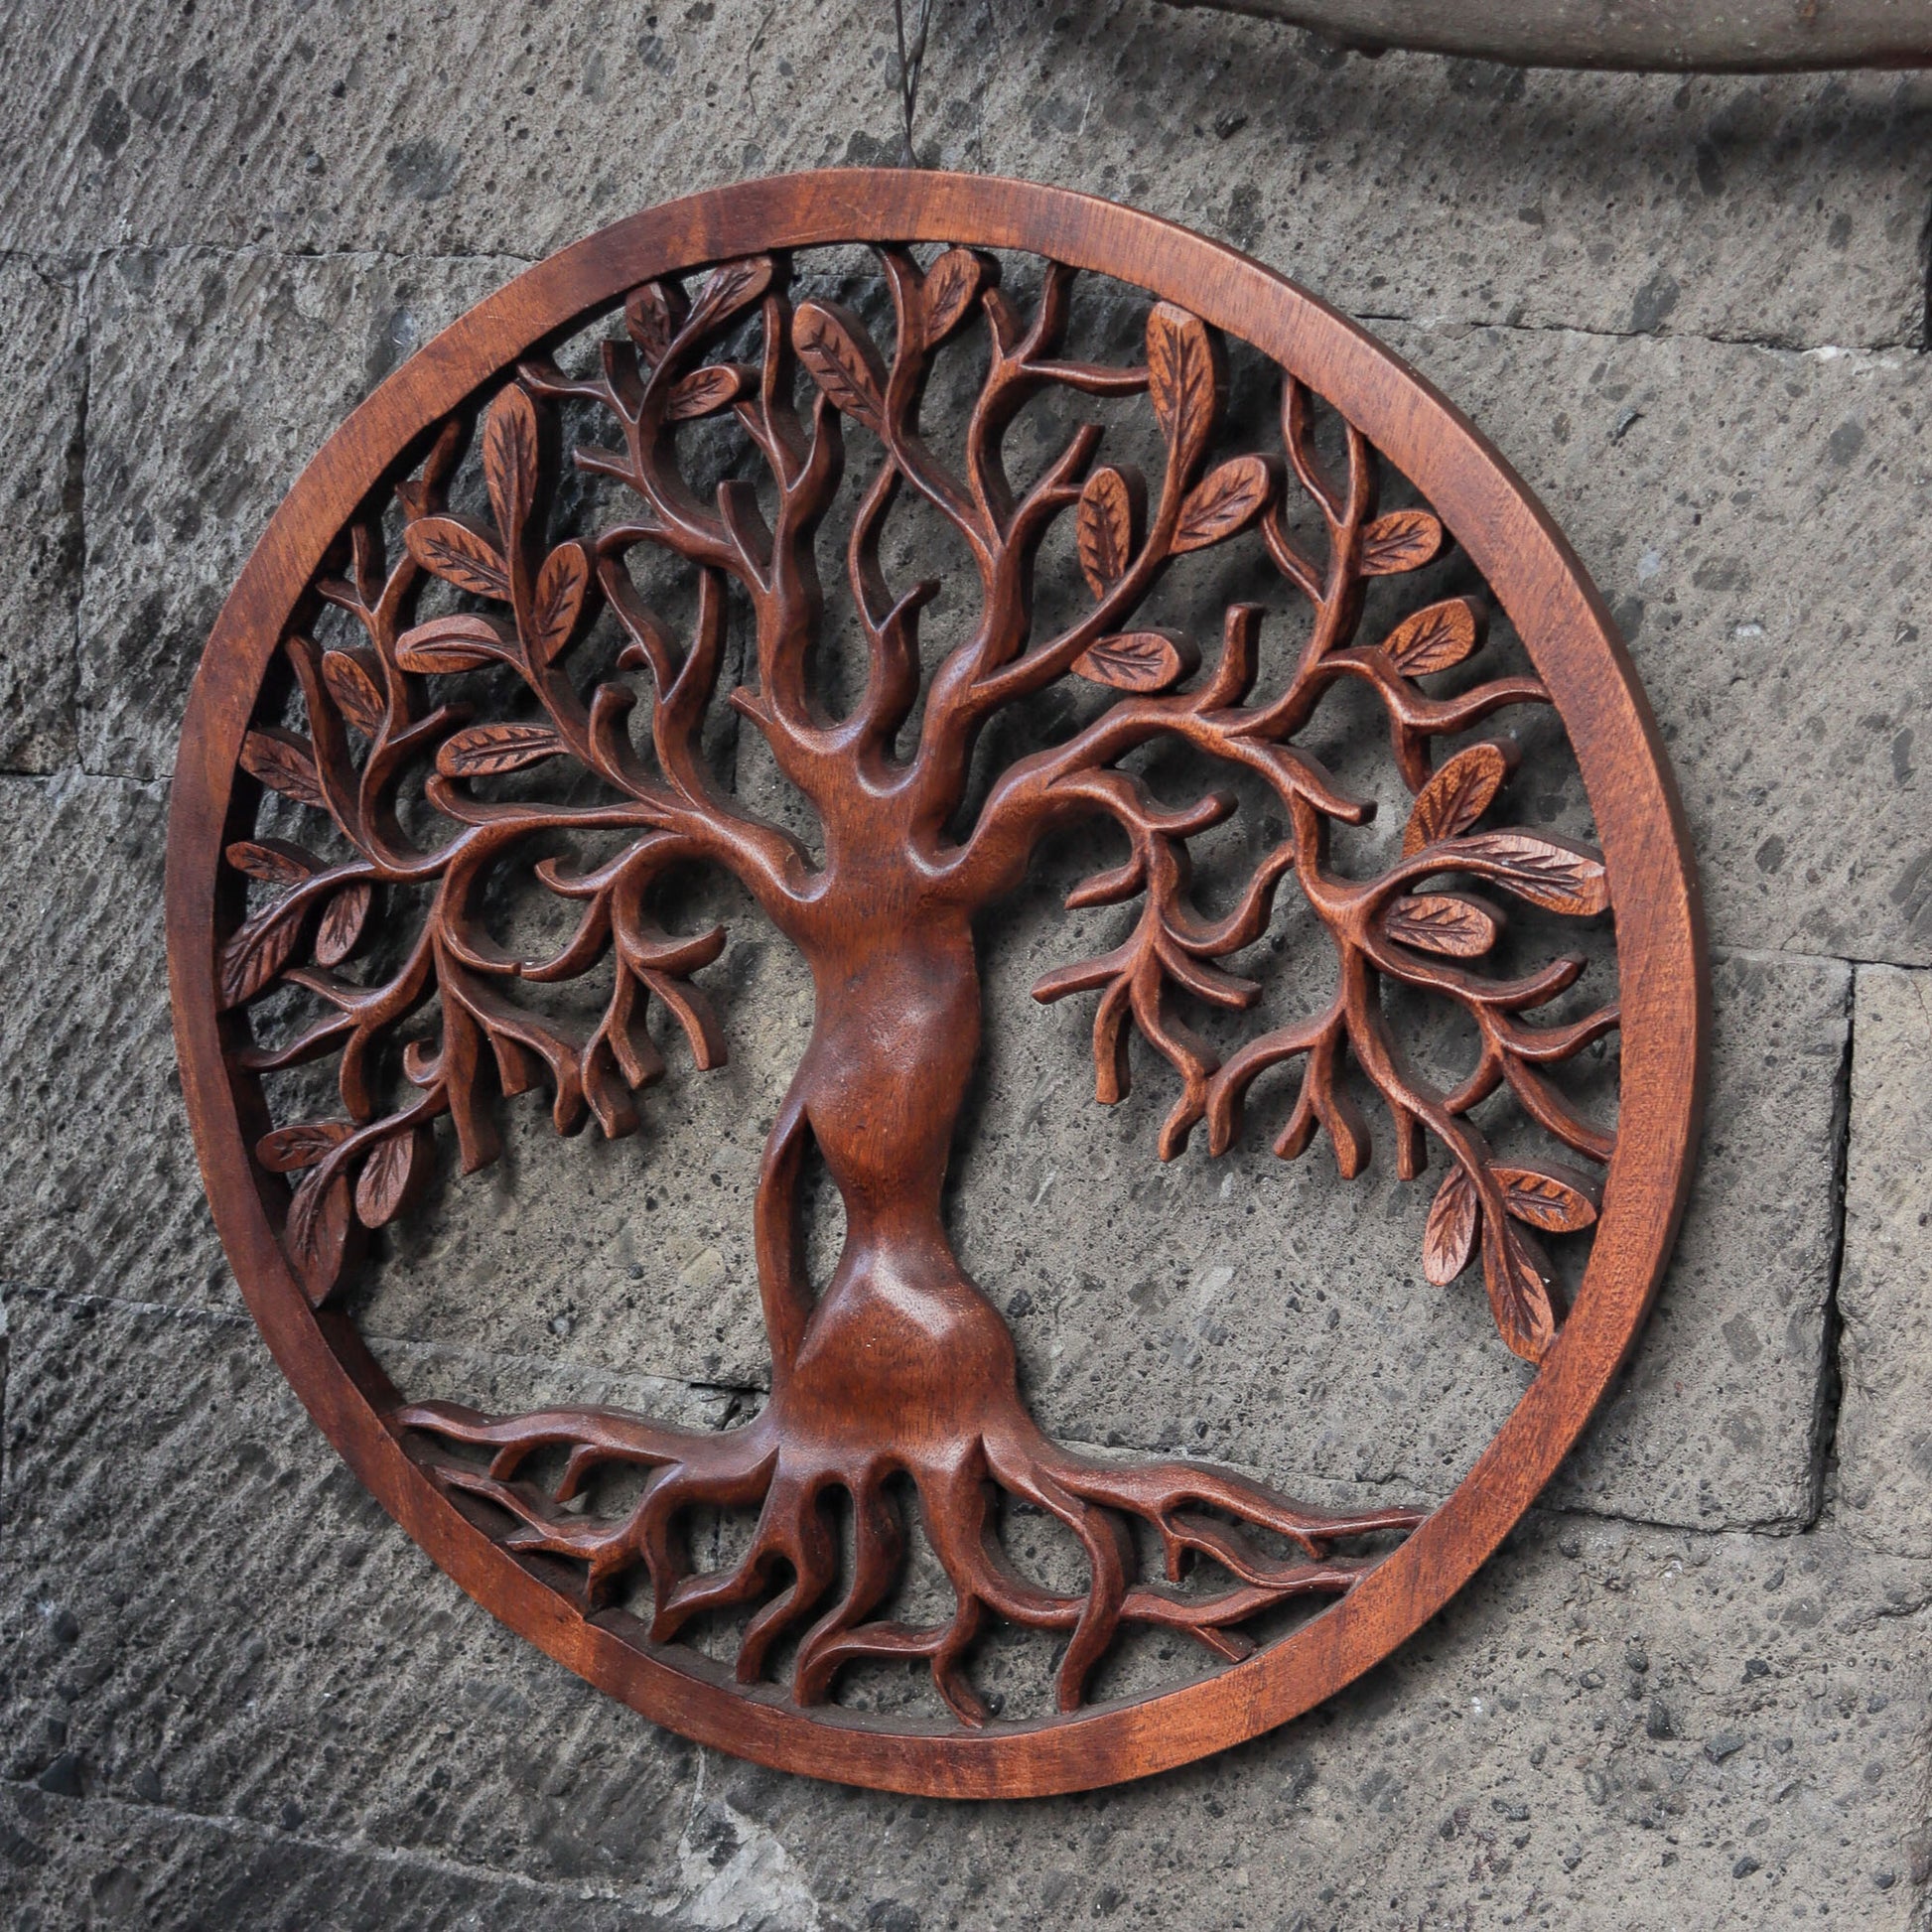 Carved wood wall art